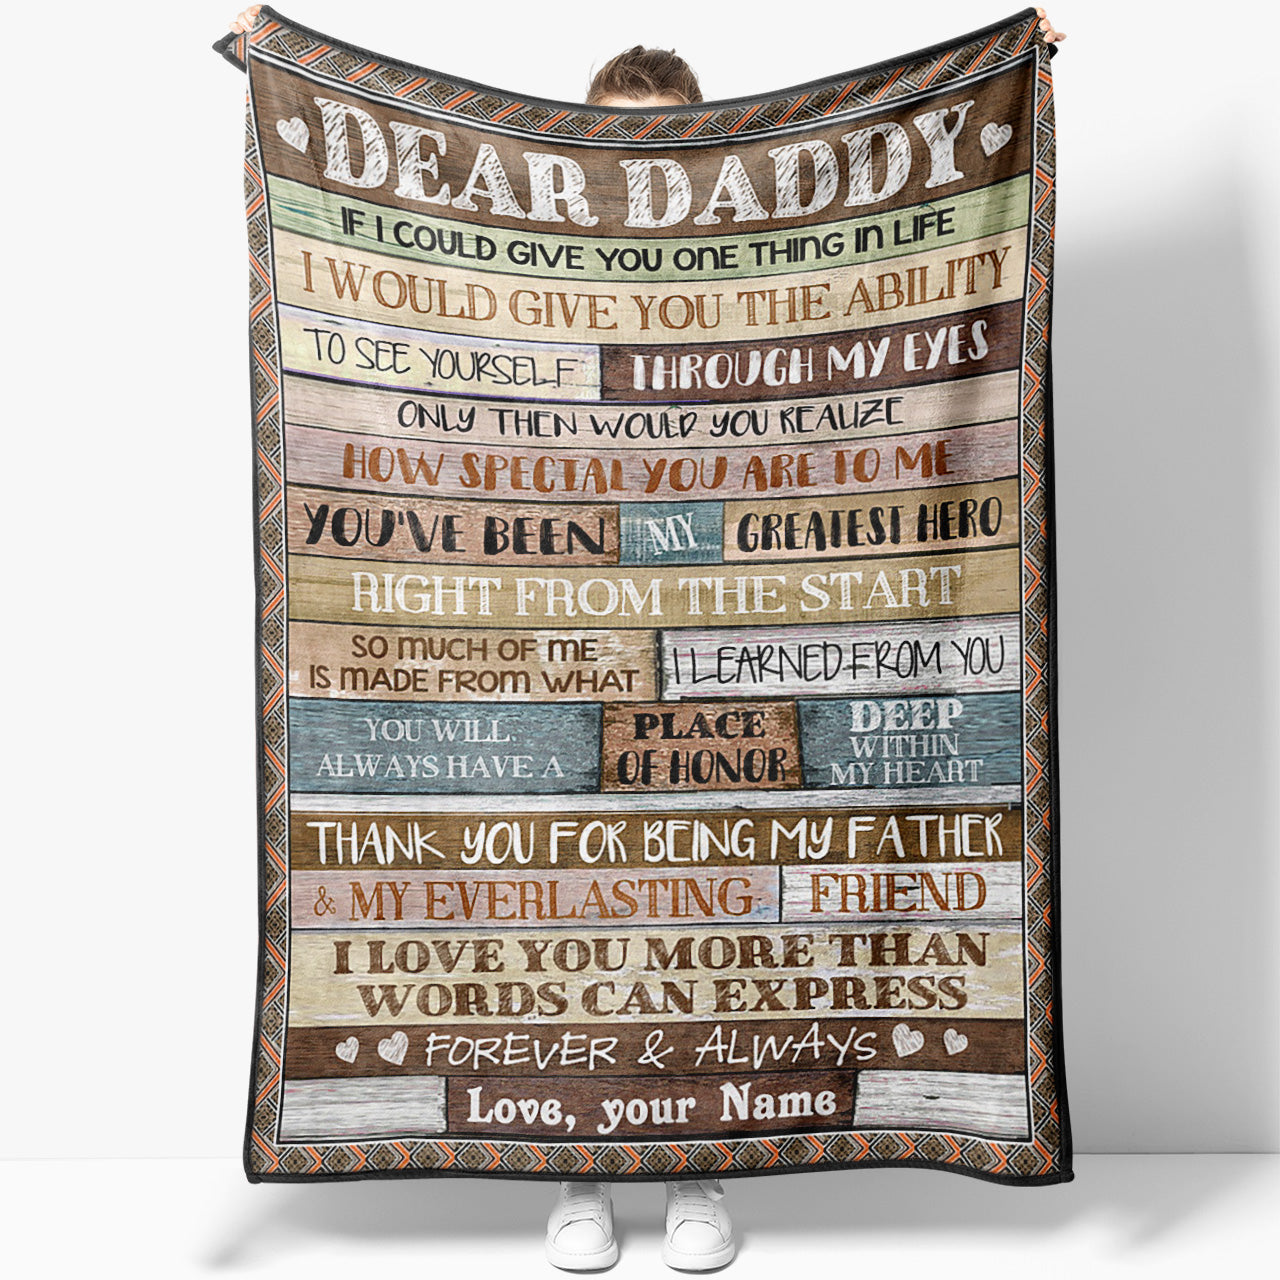 Blanket Gift Ideas for Father's Day, How Special You Are to Me Blanket for Dad